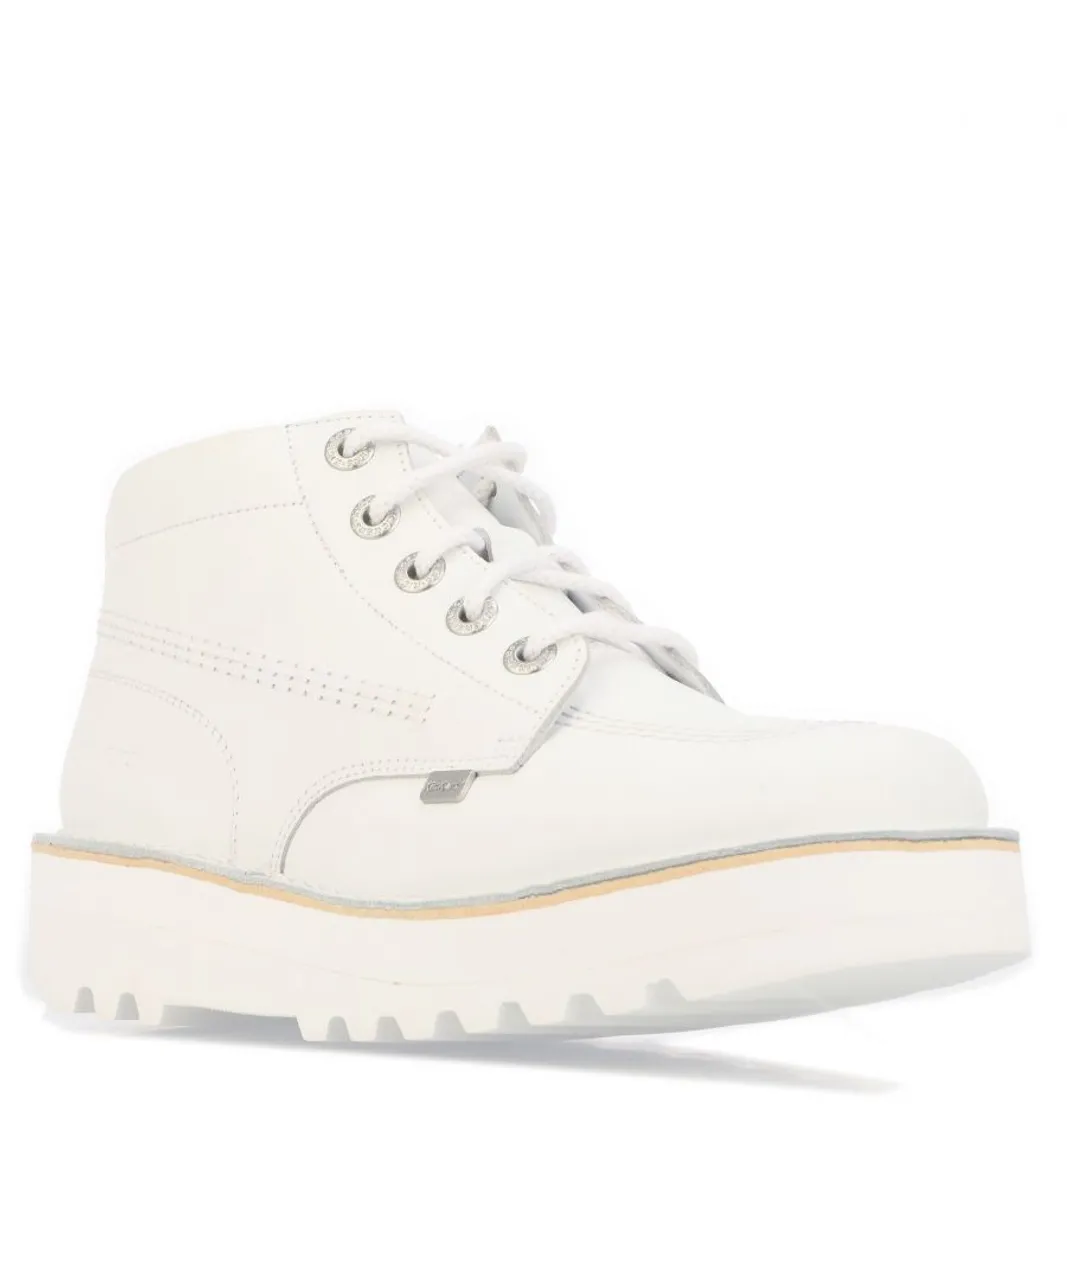 Kickers Womenss Kick Hi Stack Boots in White Leather